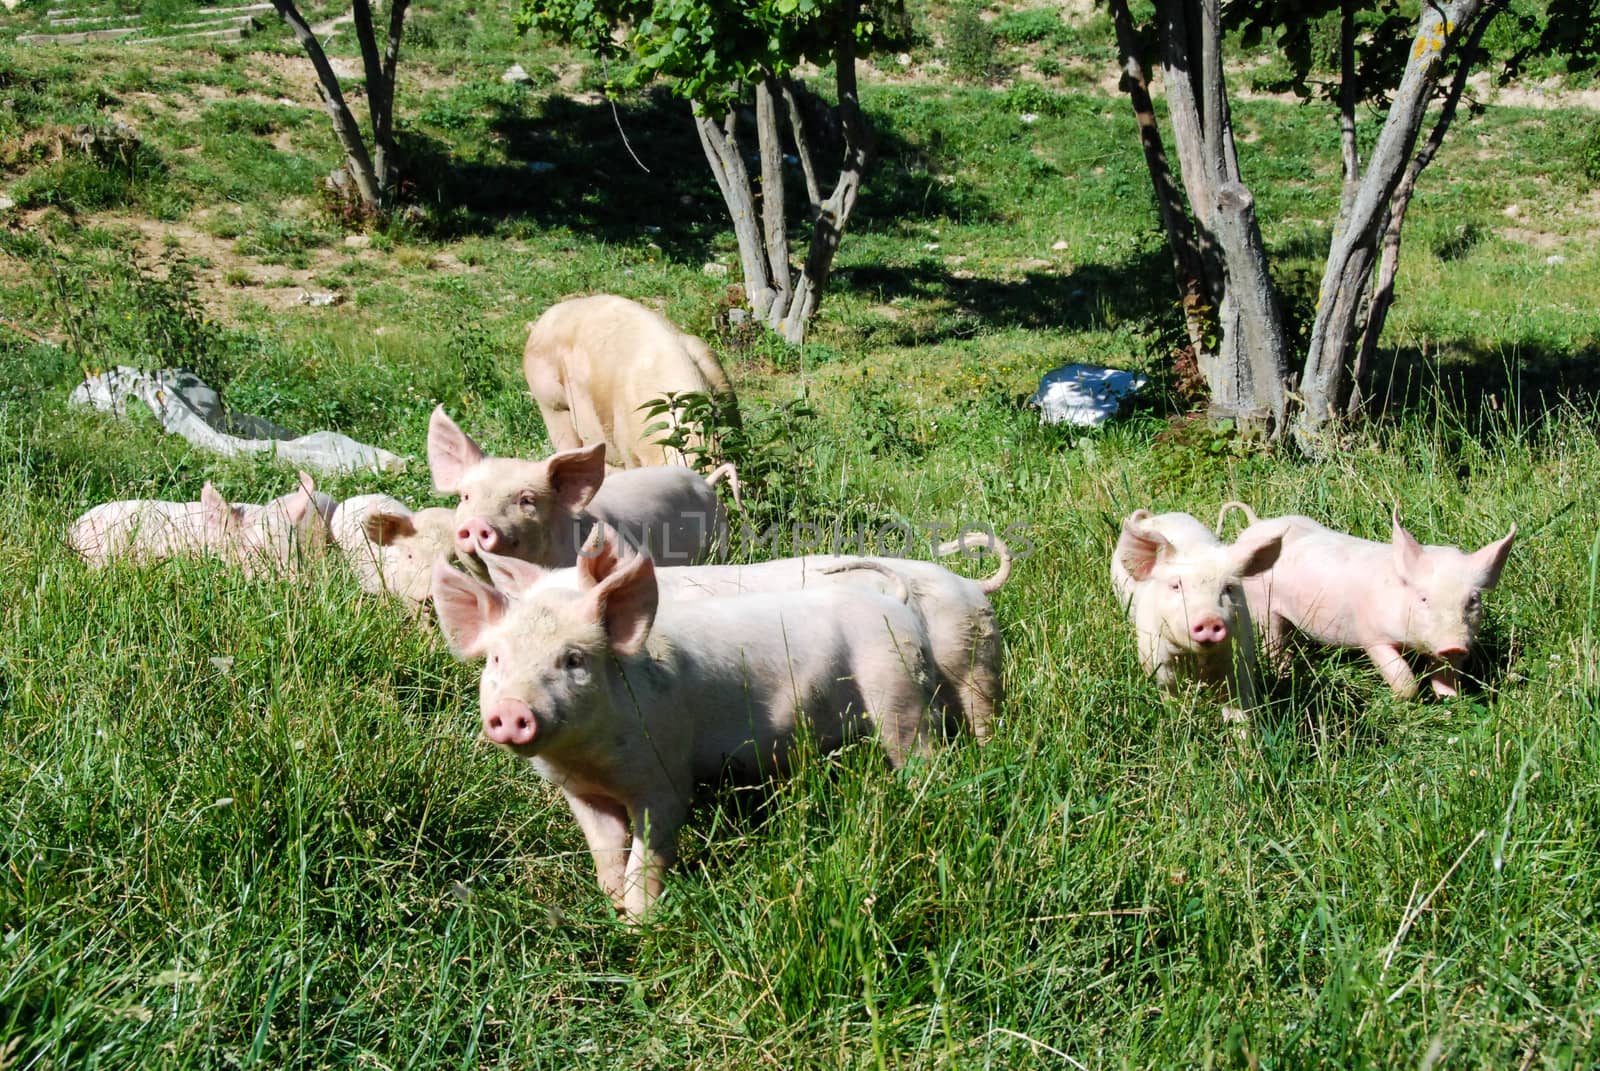 Some piglets run in a meadow by cosca